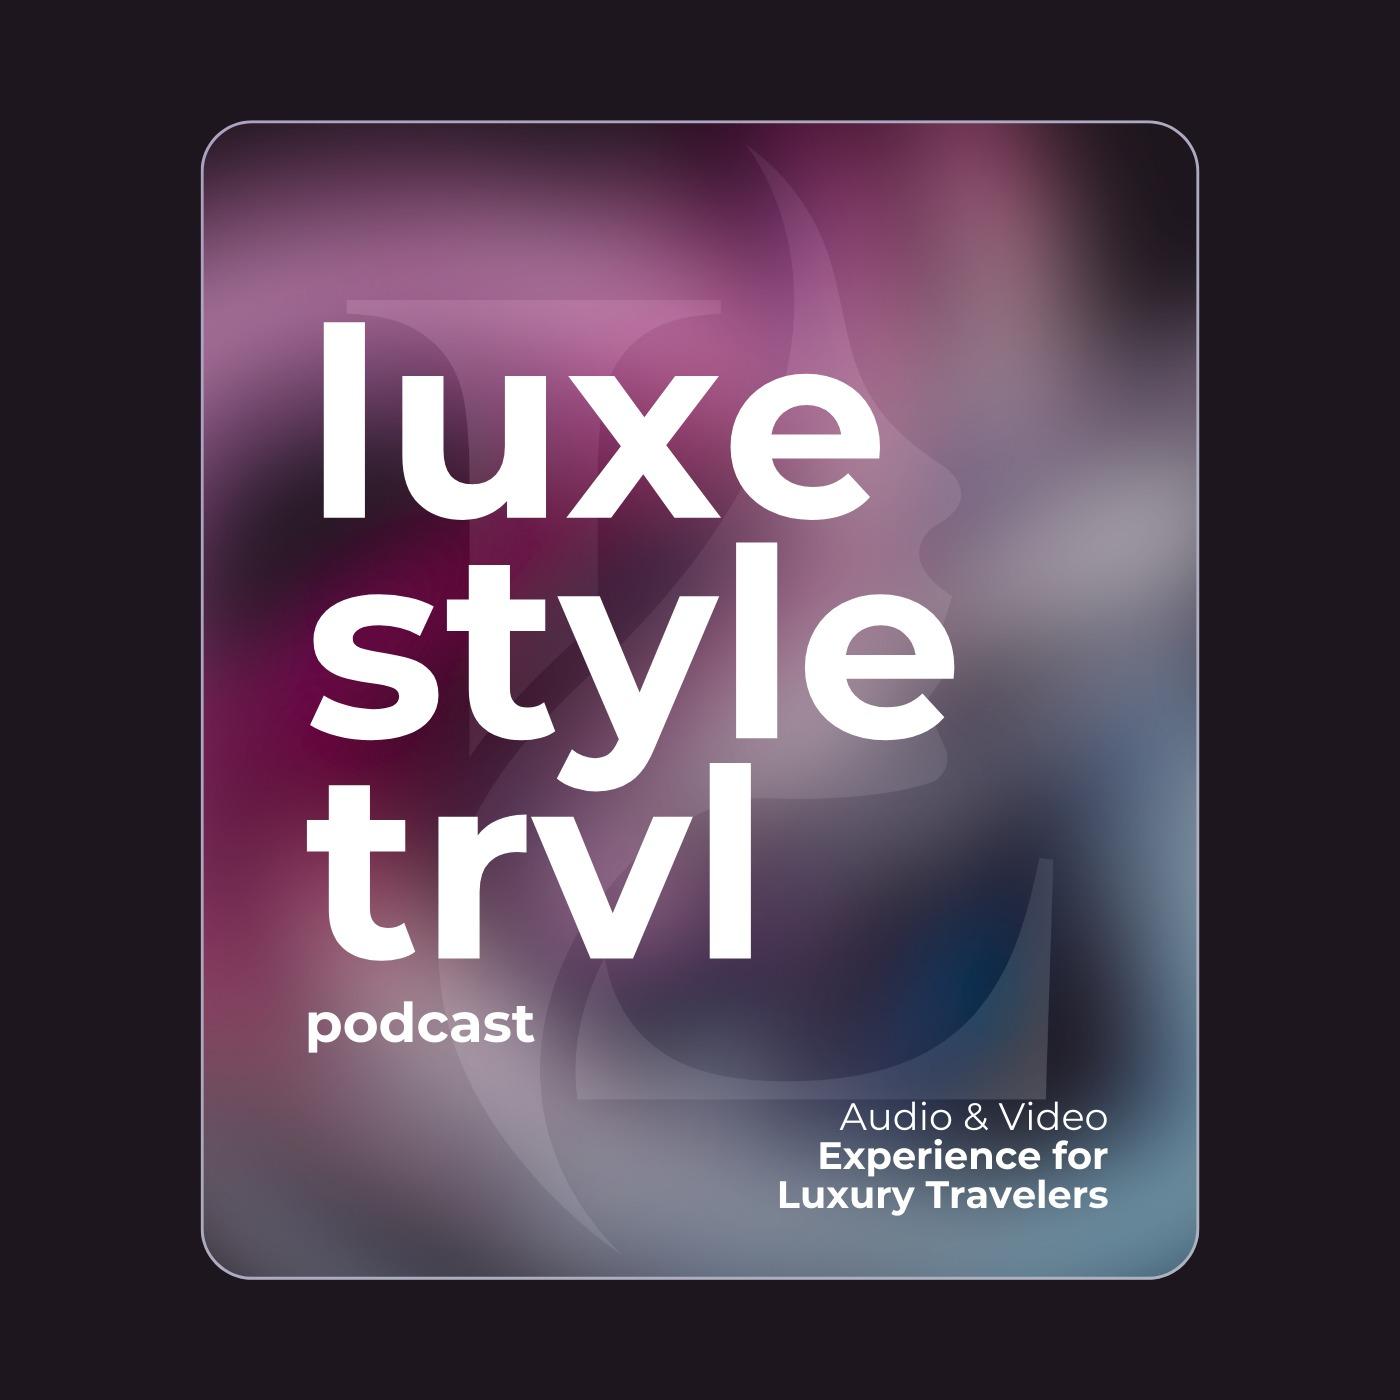 LuxeStyle Travel - A Travel Audio & Video Experience